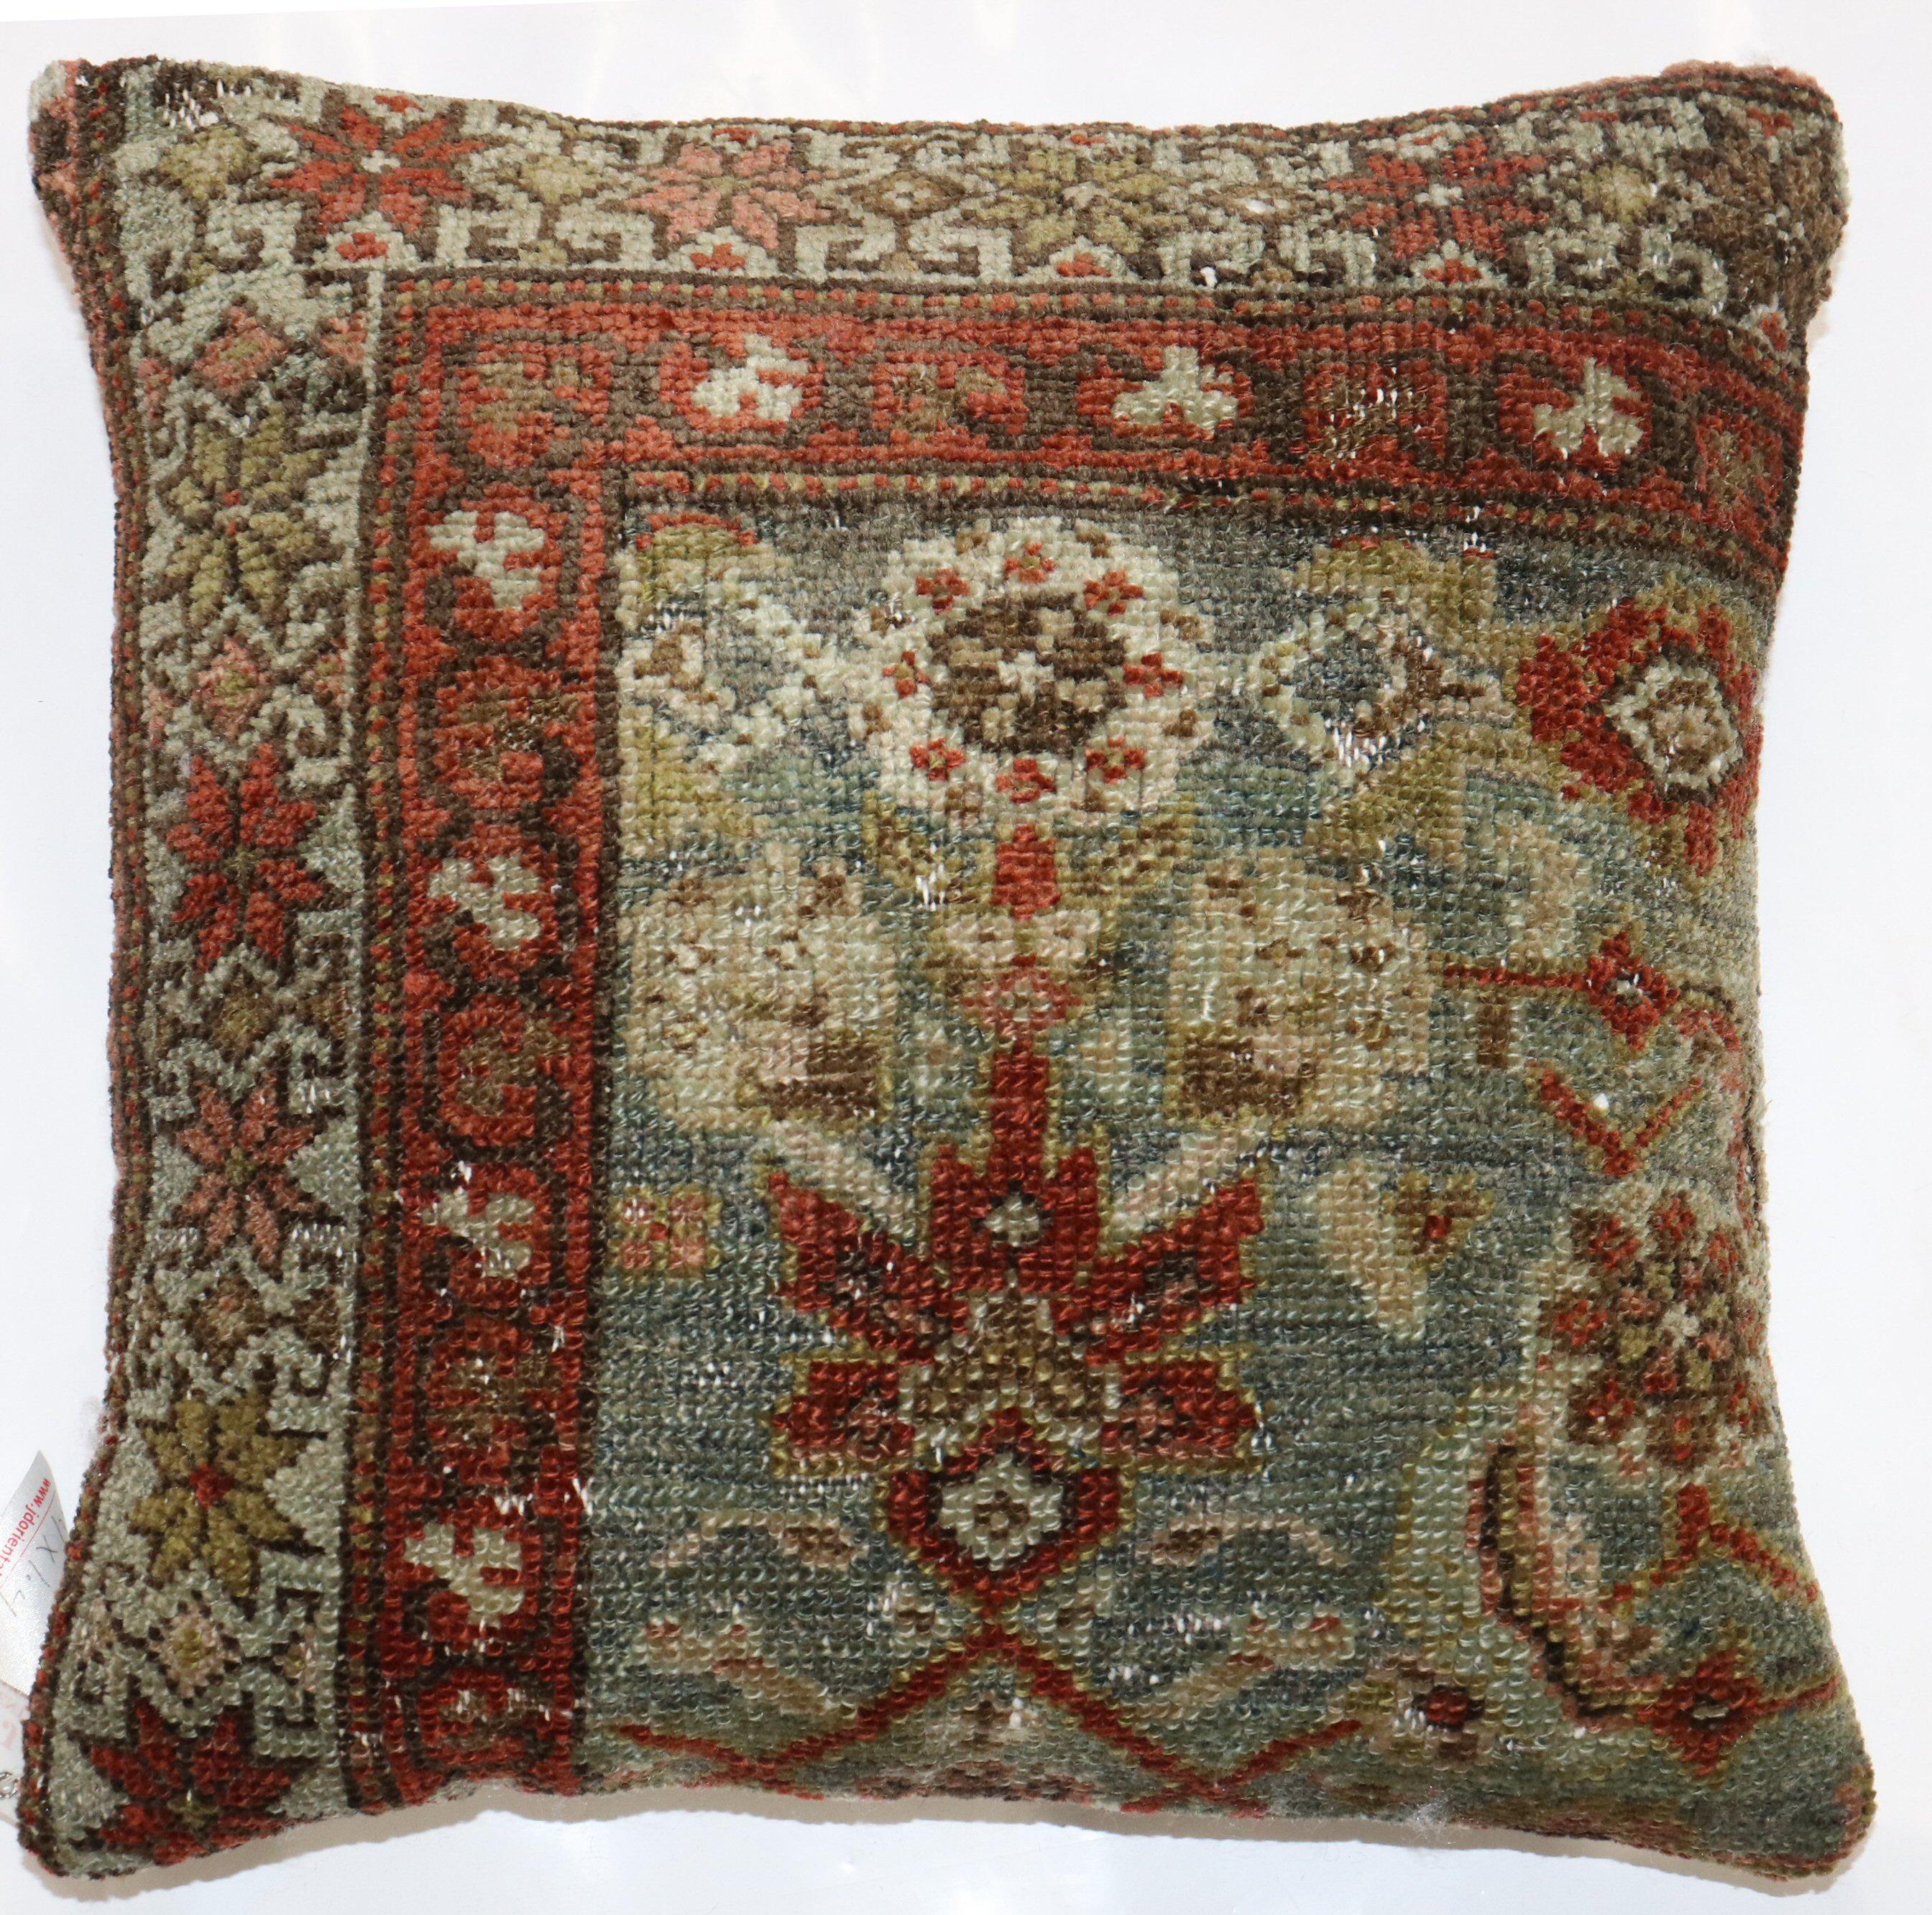 Pillow made from a sea foam-colored 20th-century Persian rug.

Measures: 16